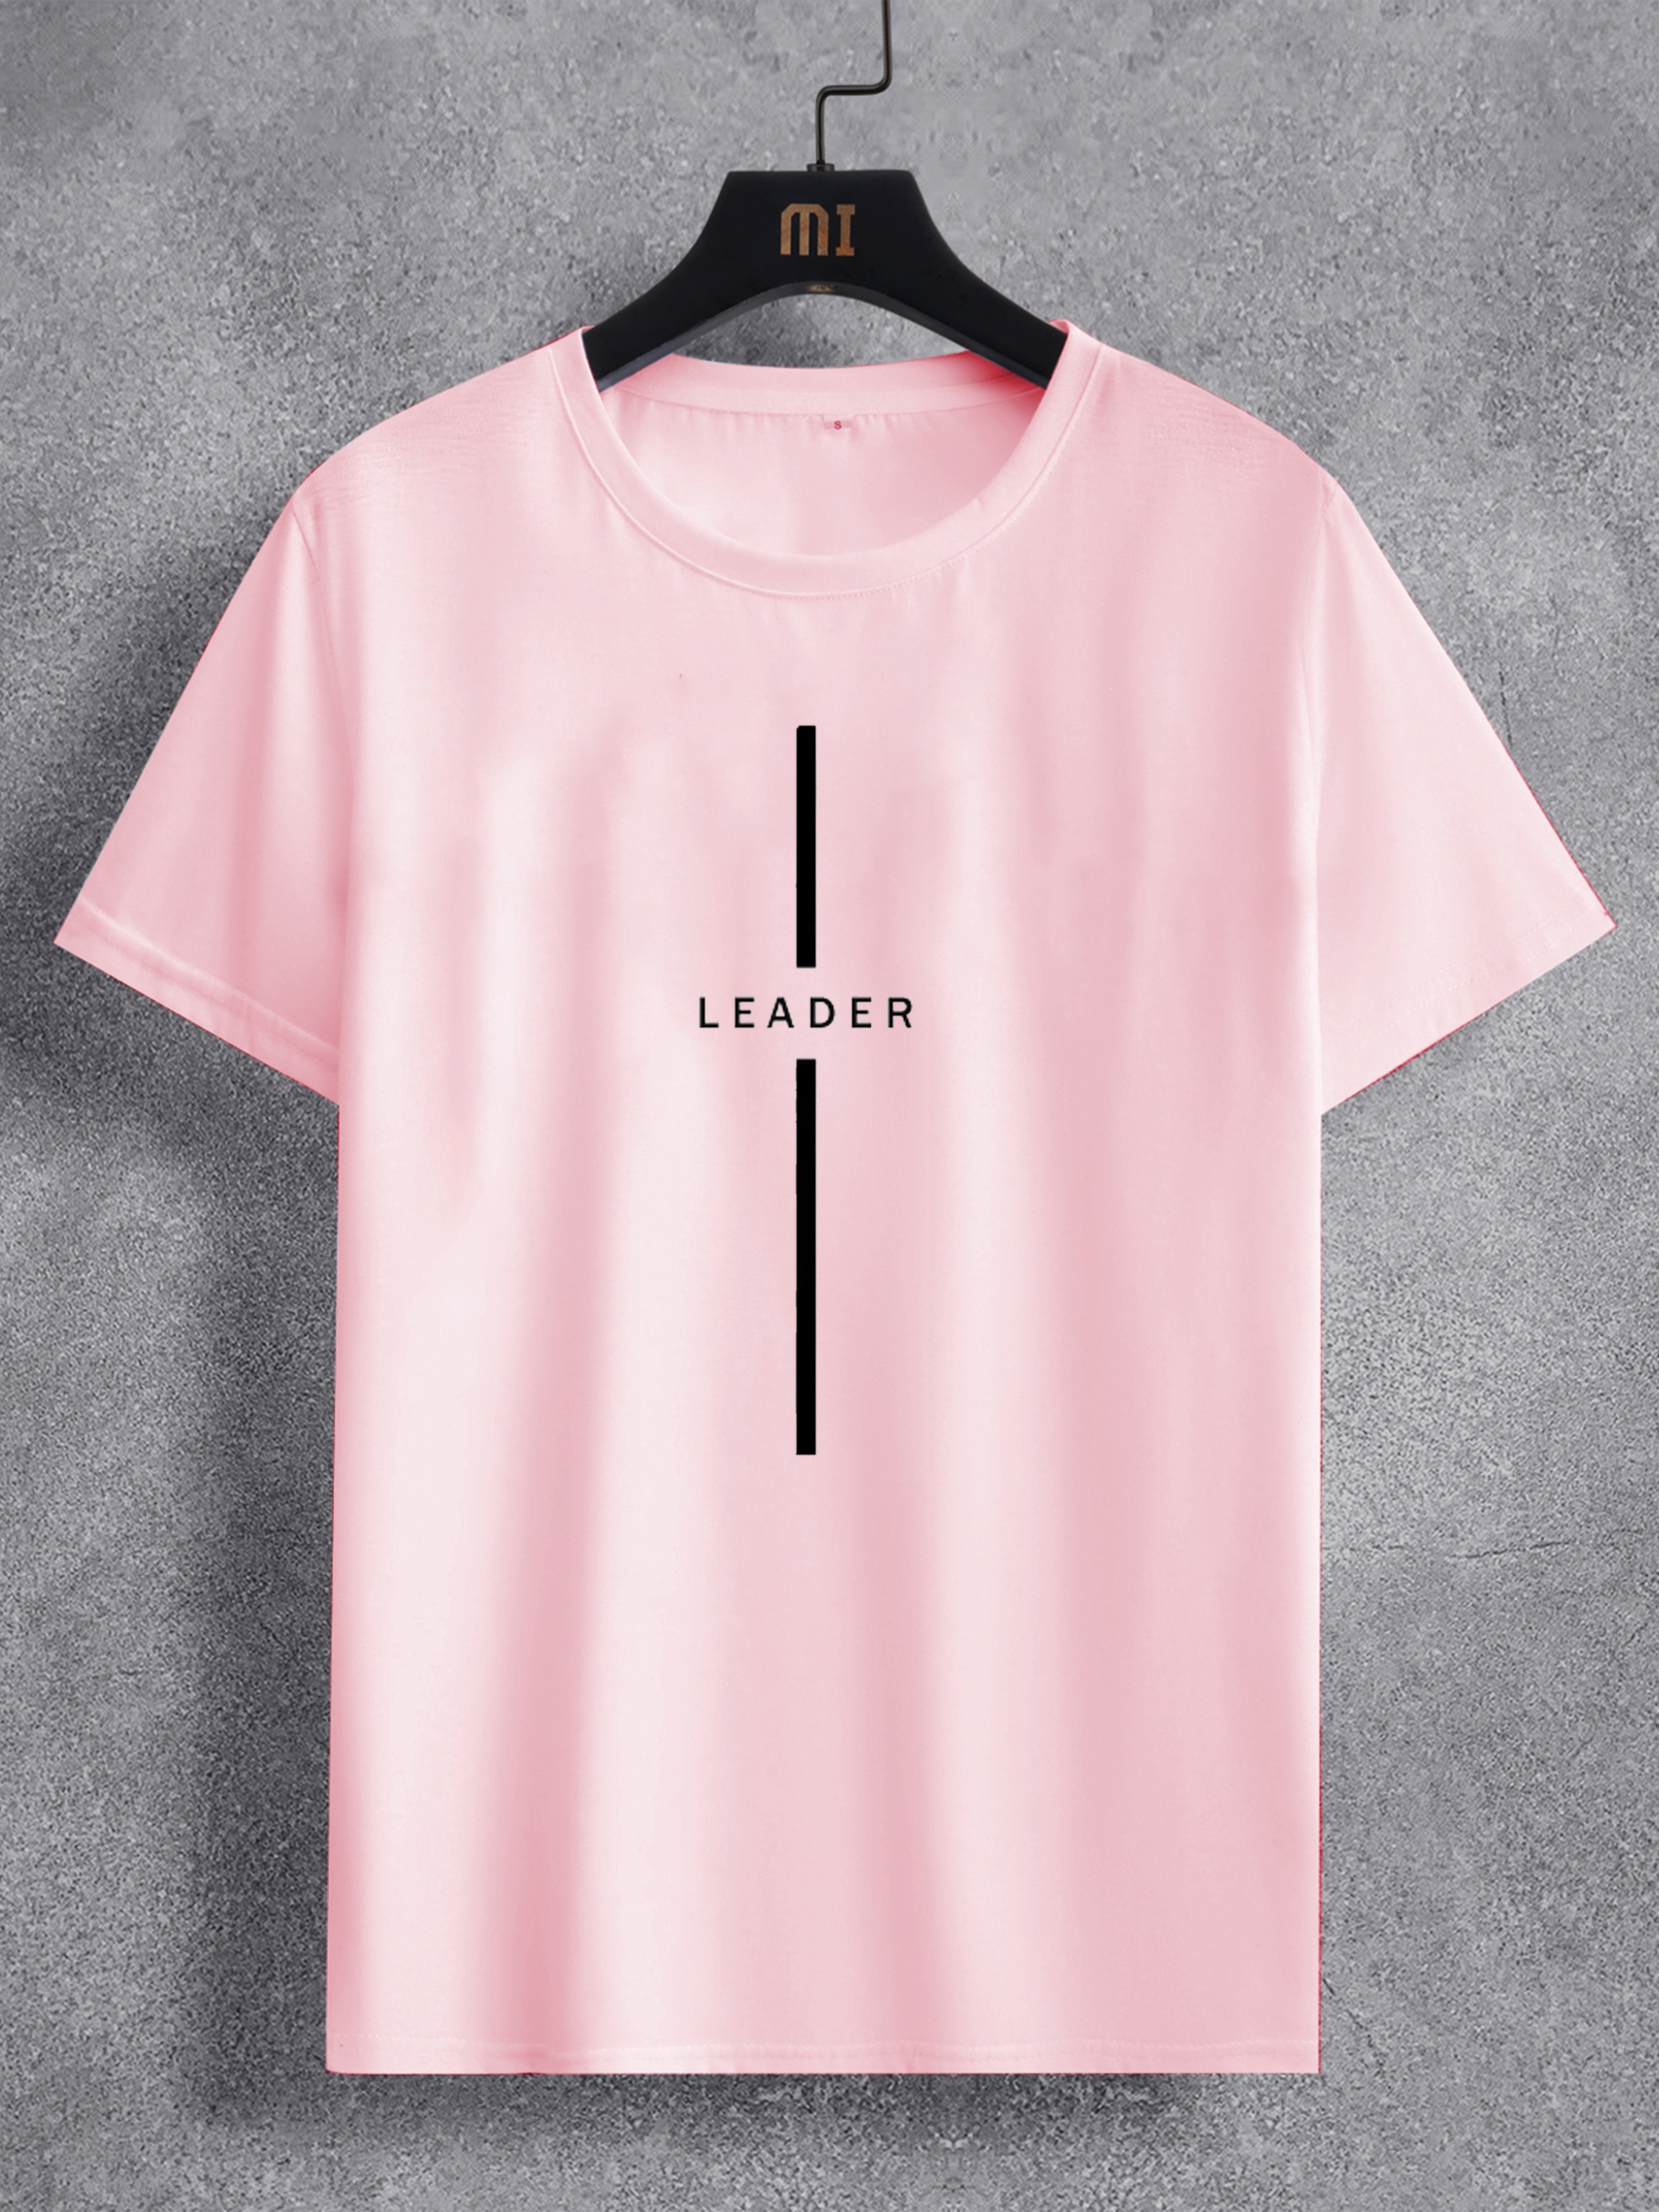 Be The Leader Top Pattern (adult)